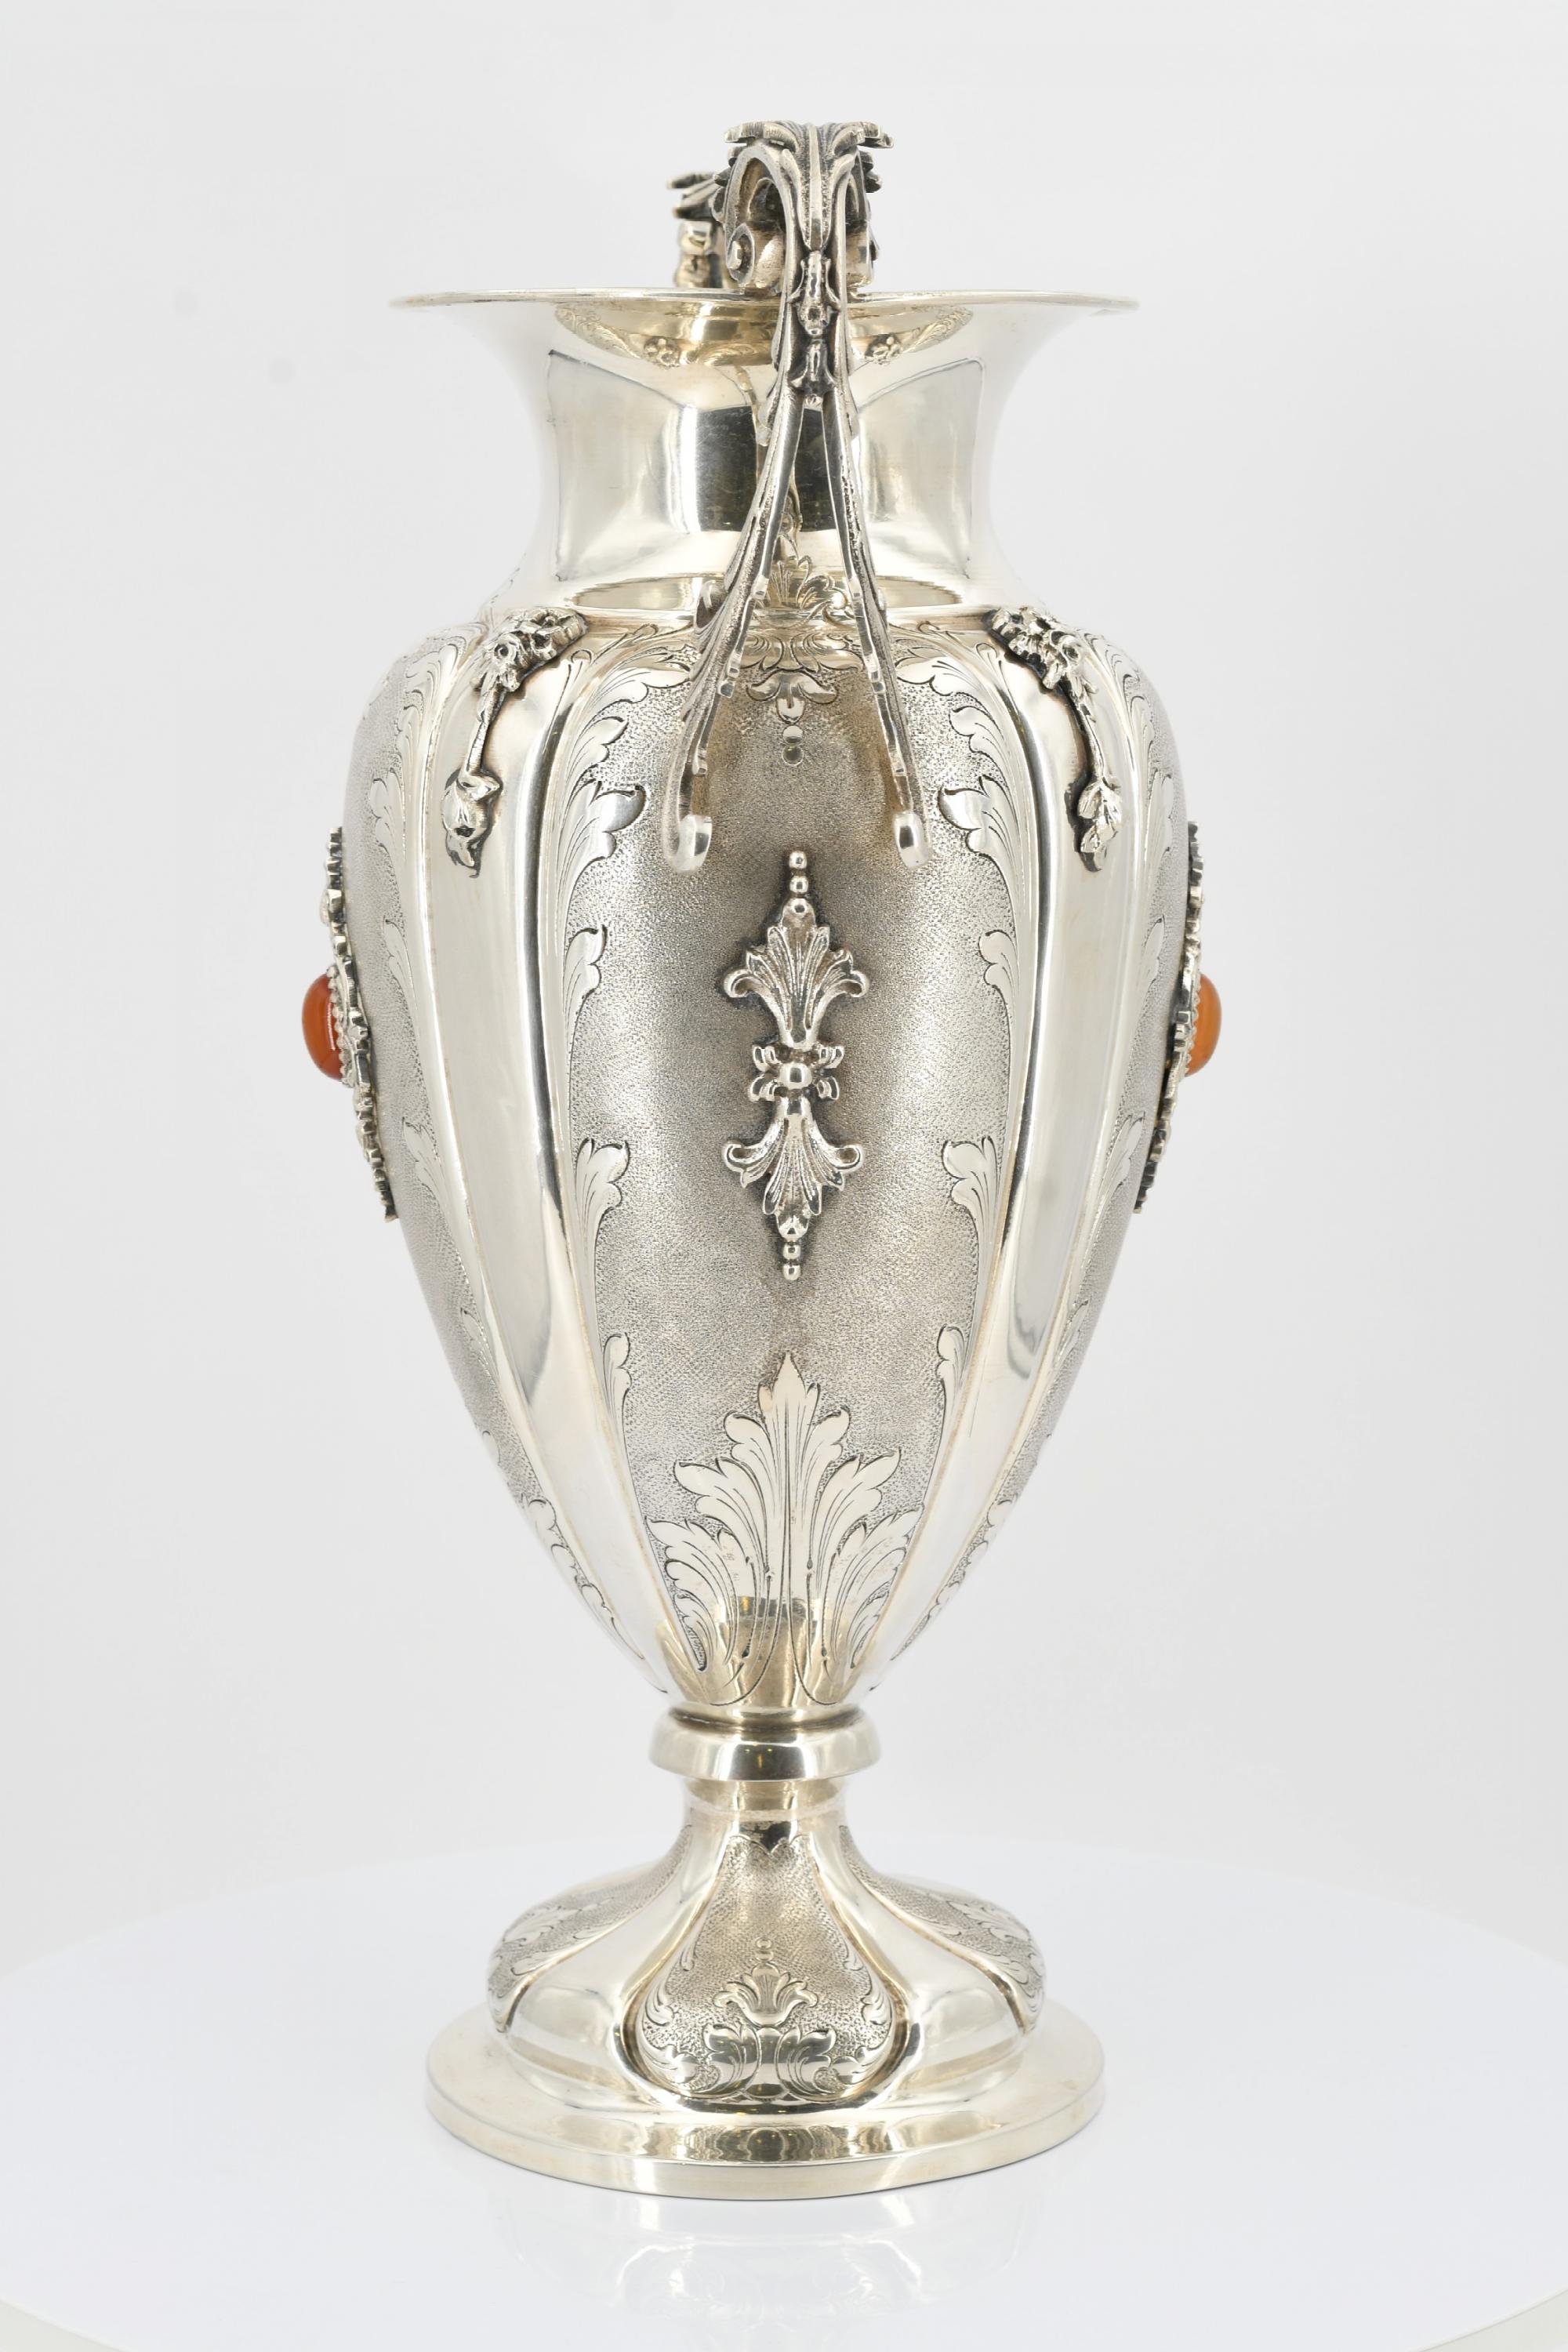 Baluster-shaped vase with rich ornamental décor - Image 5 of 7